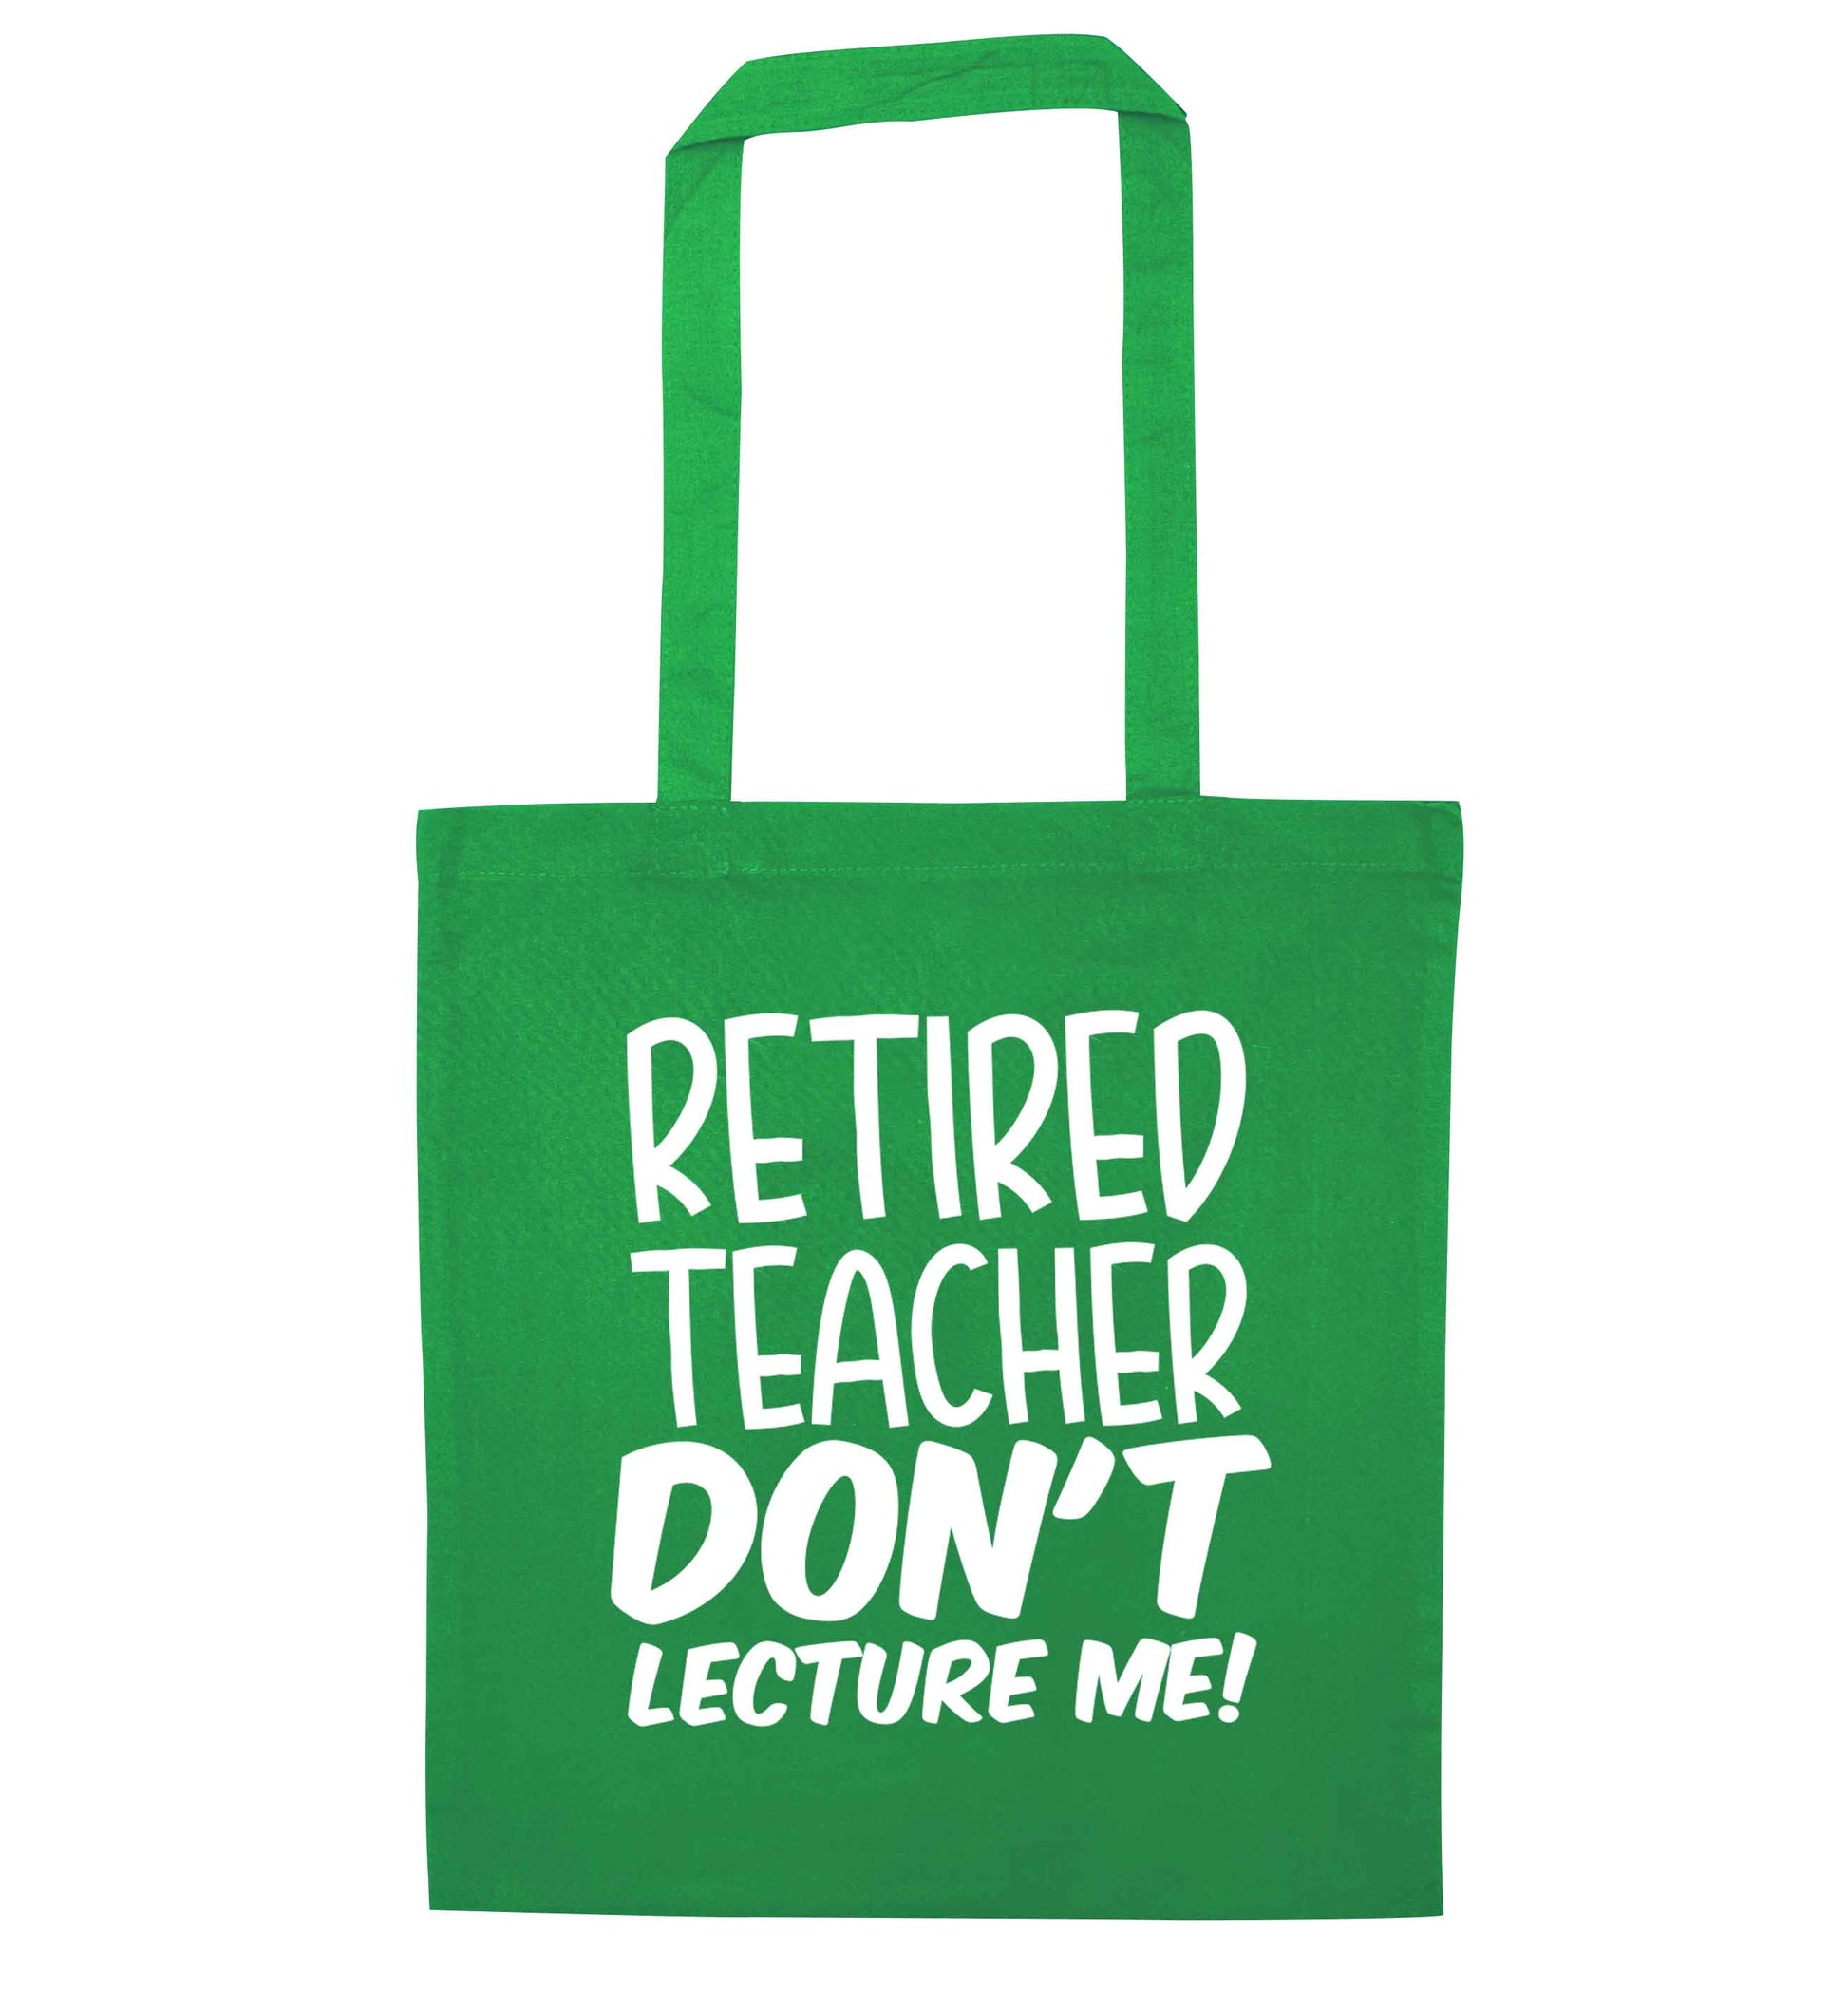 Retired teacher don't lecture me! green tote bag